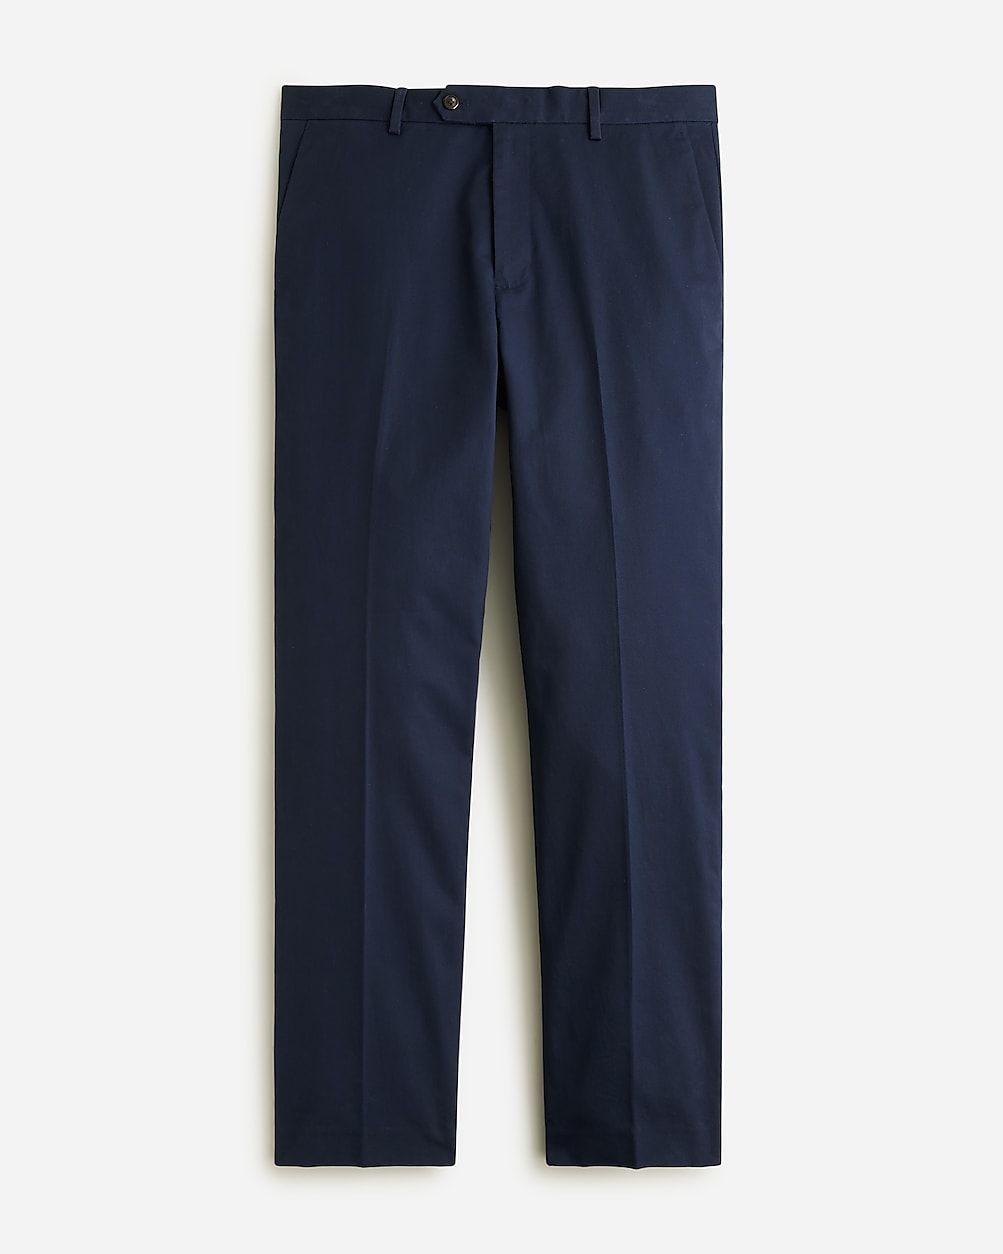 Bowery dress pant in stretch chino | J.Crew US